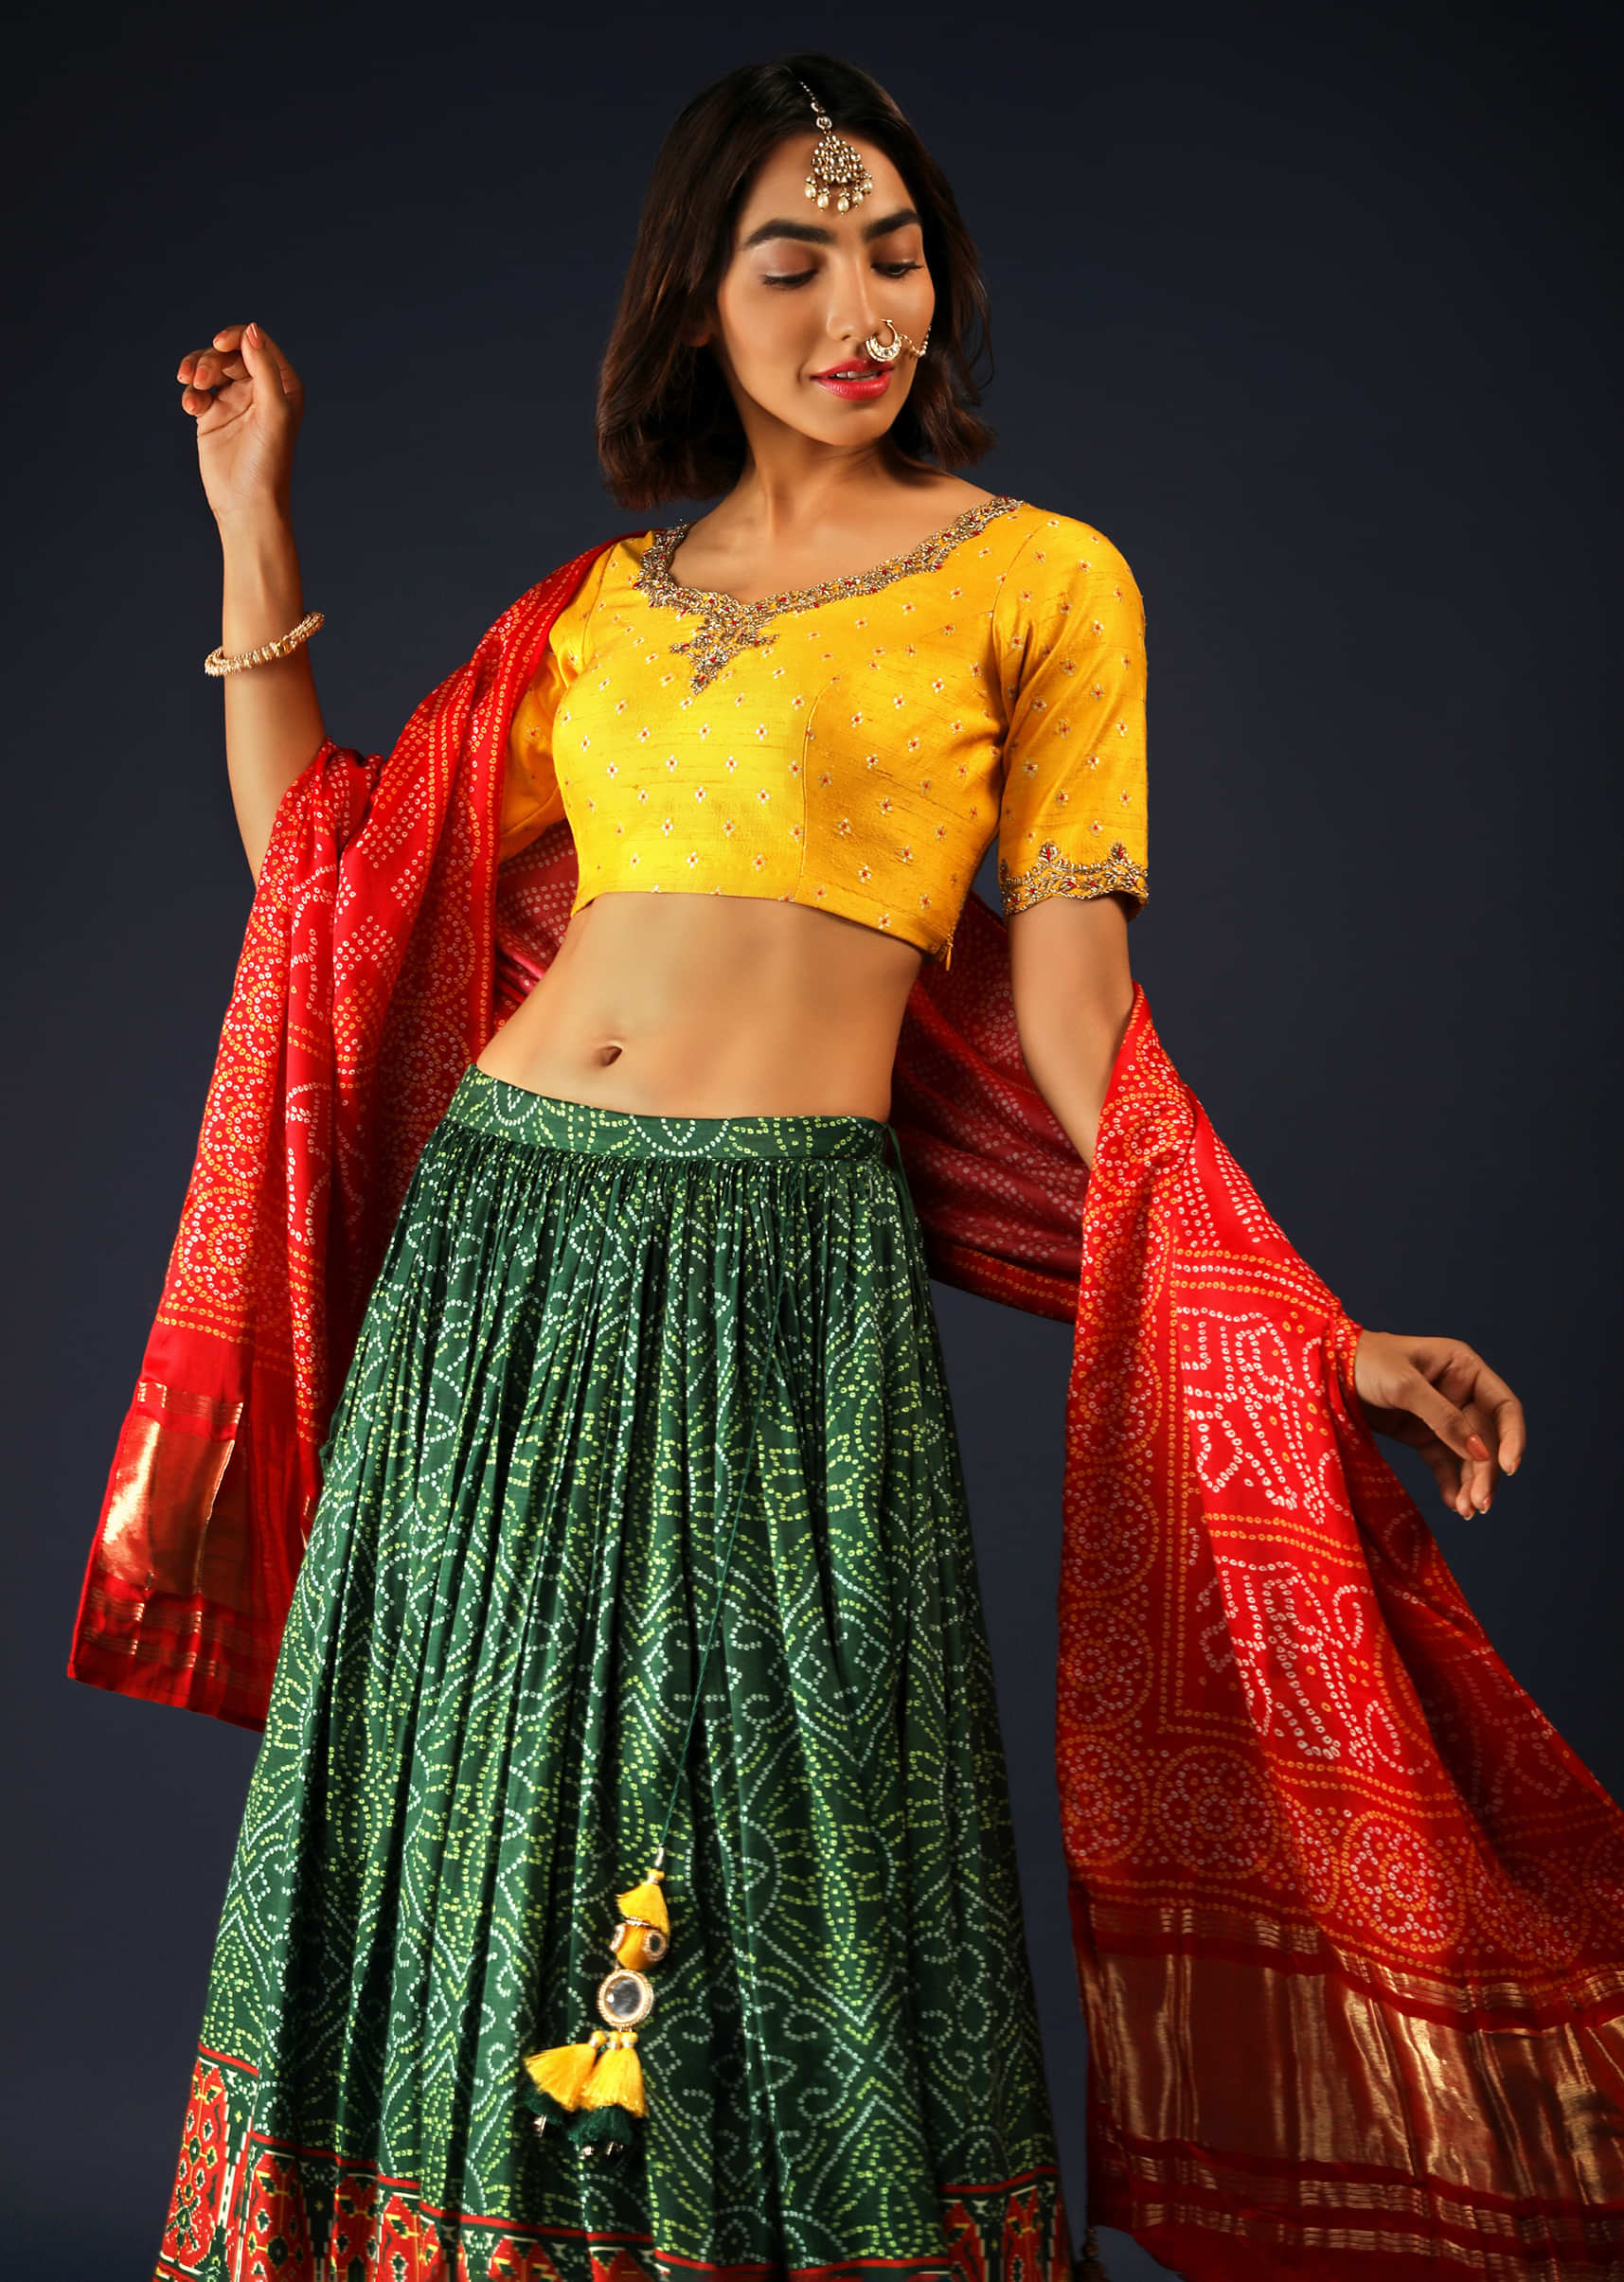 Forest Green Lehenga And Red Dupatta In Satin With Bandhani Print And Yellow Brocade Choli 